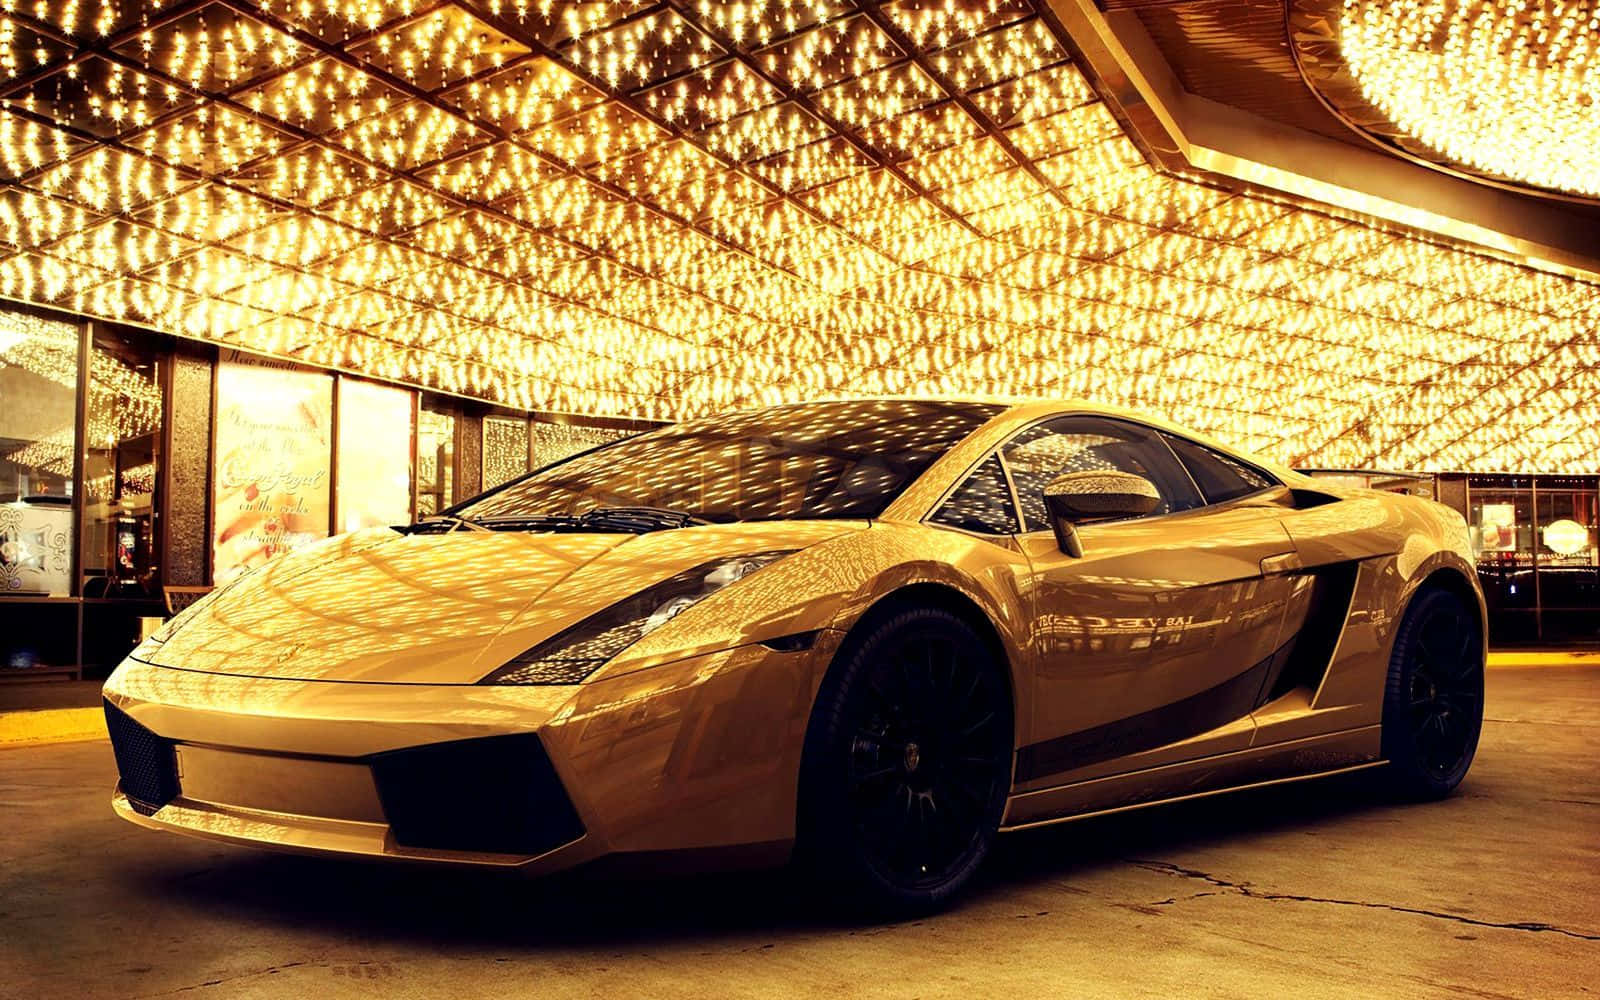 Gold Cars In Casino Background